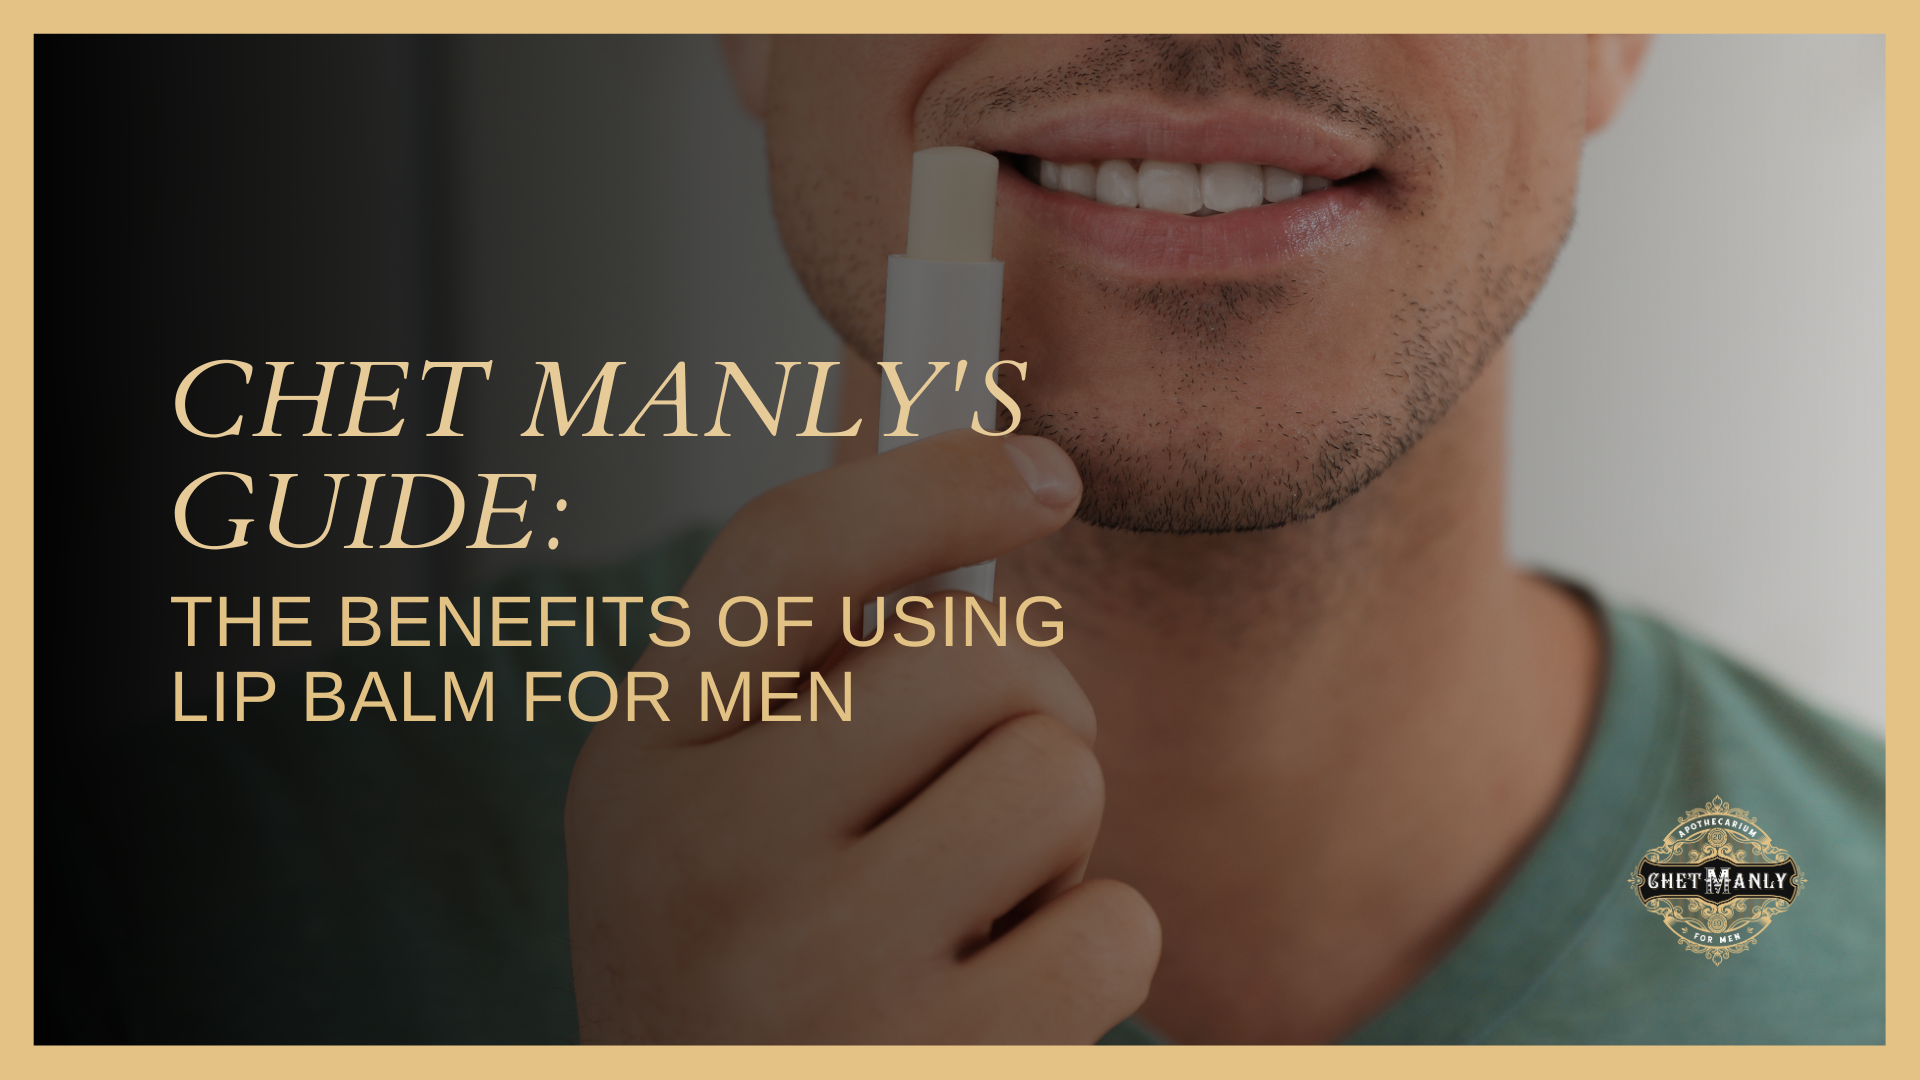 Chet Manly's Guide: The Benefits of Using Lip Balm for Men